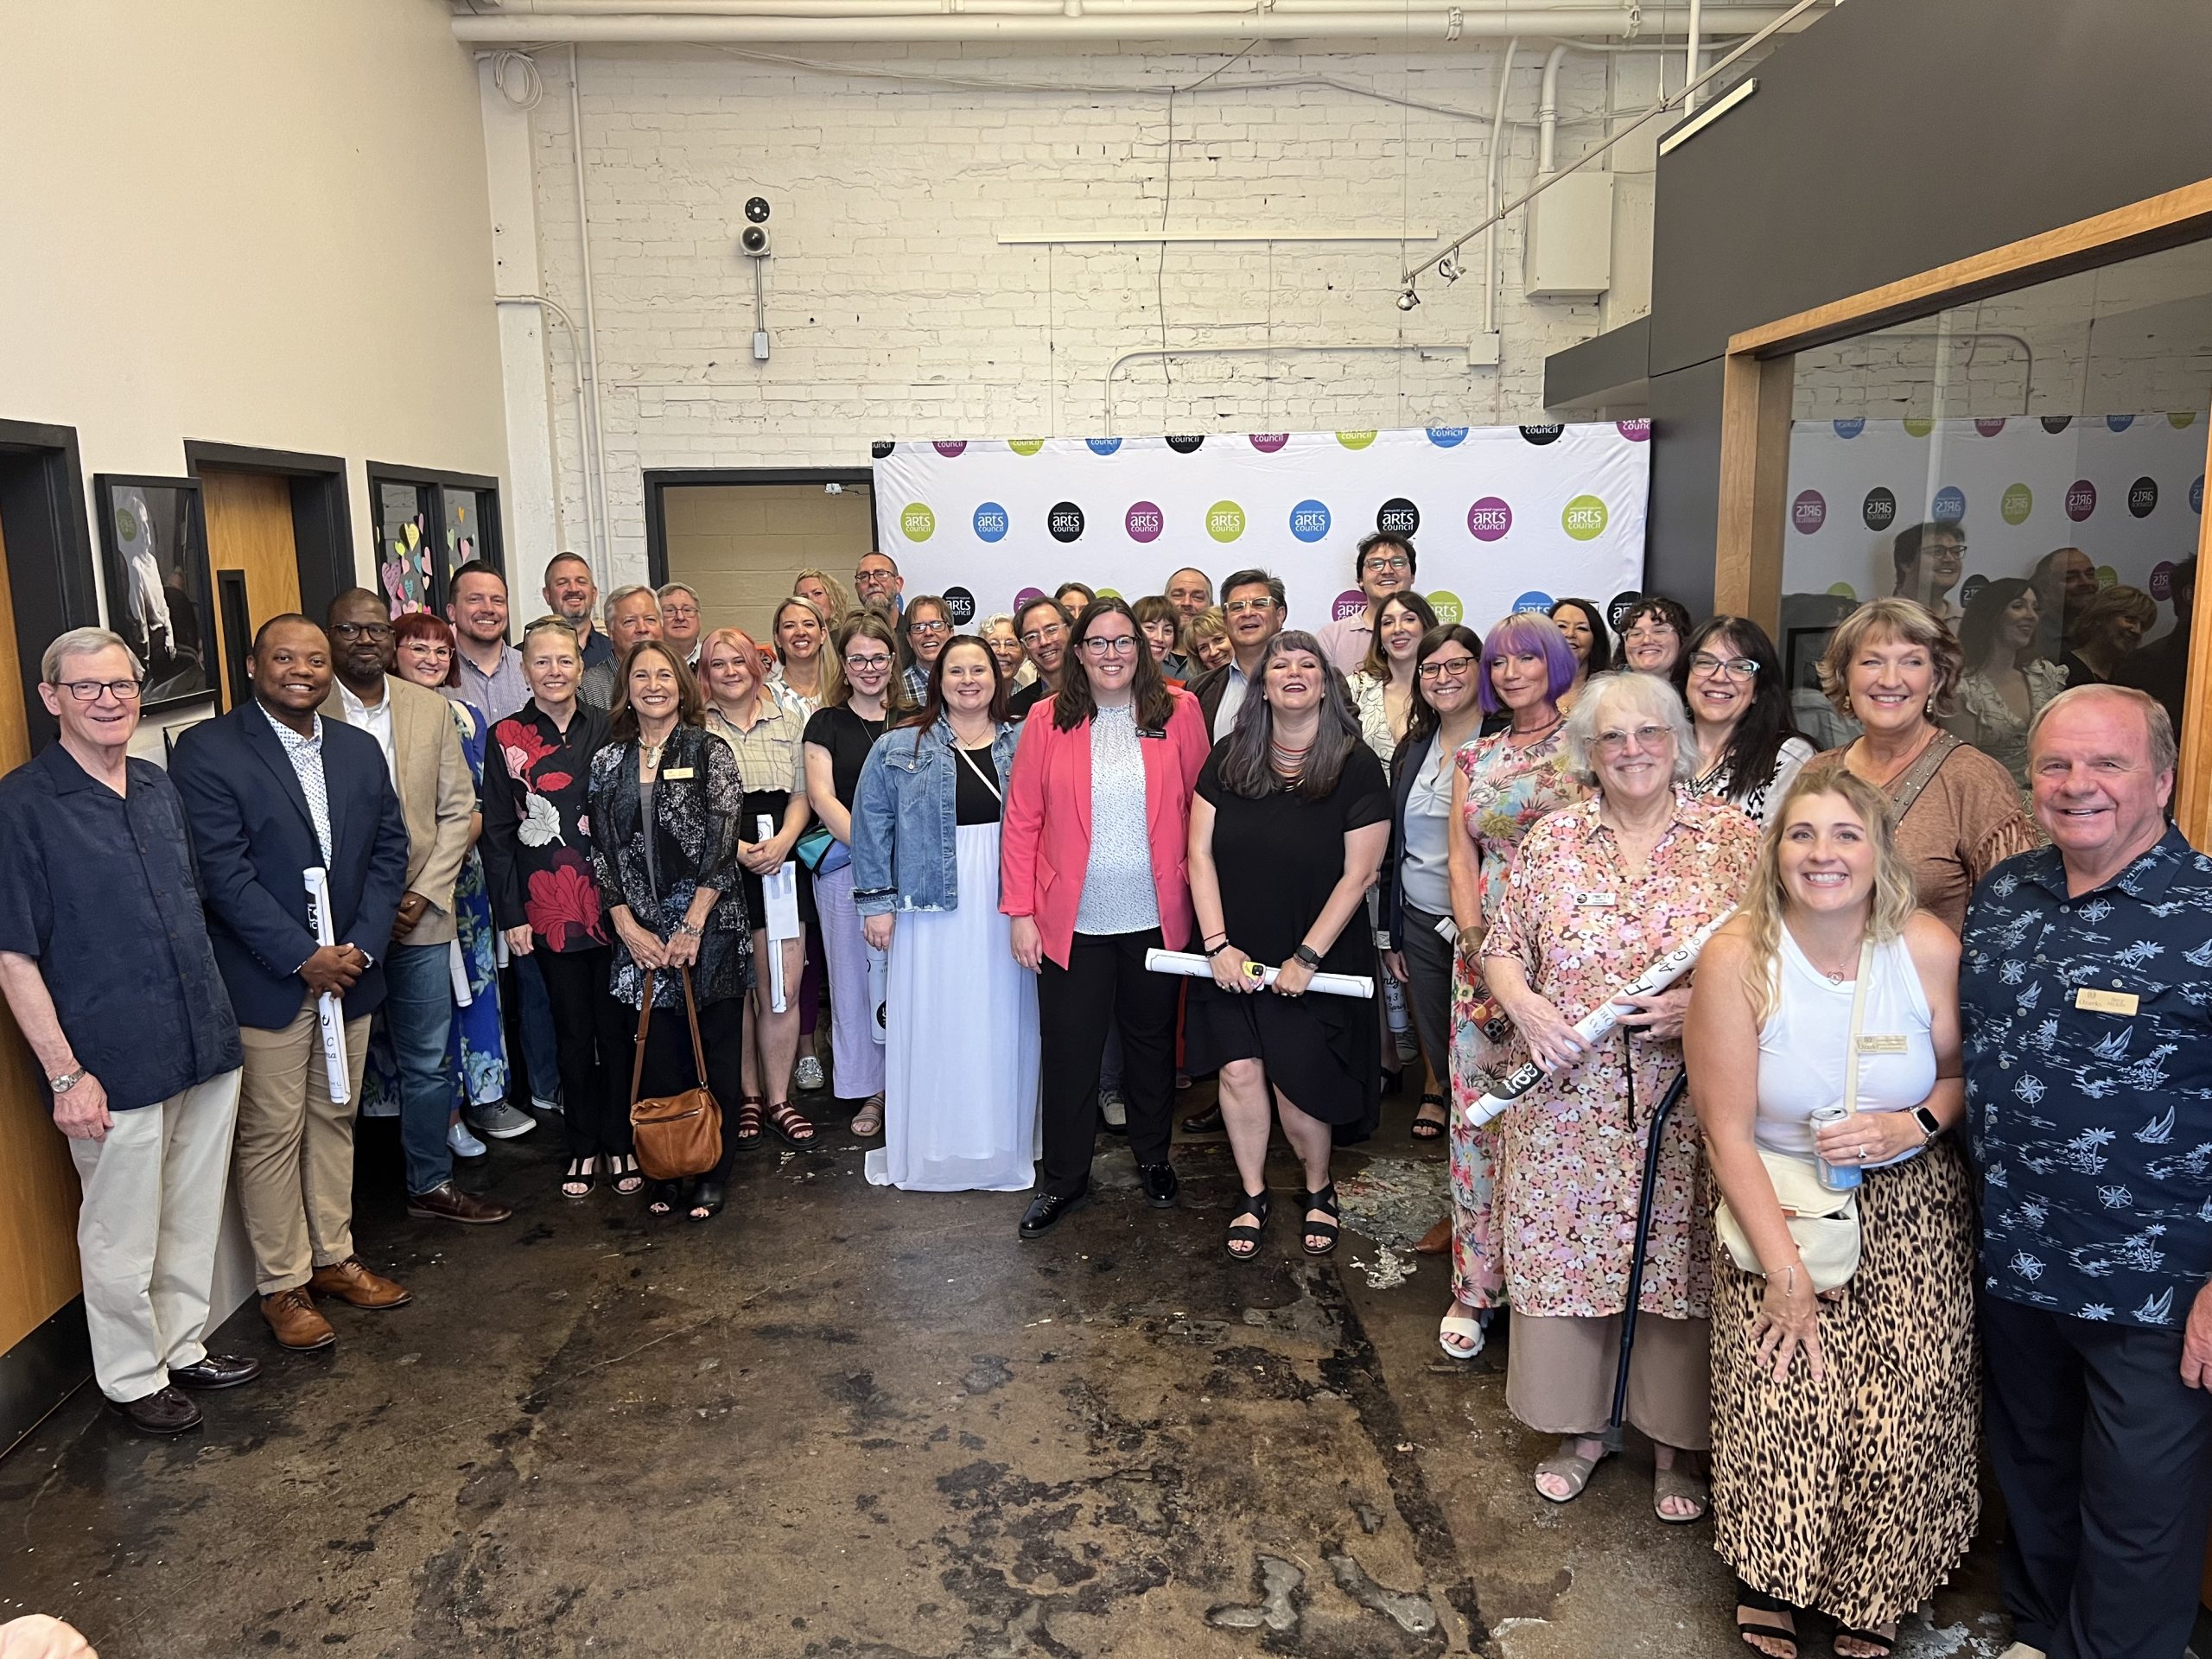 A group photo of Arts & Culture Grants recipients, taken inside the Creamer Arts Center in Springfield, Missouri.